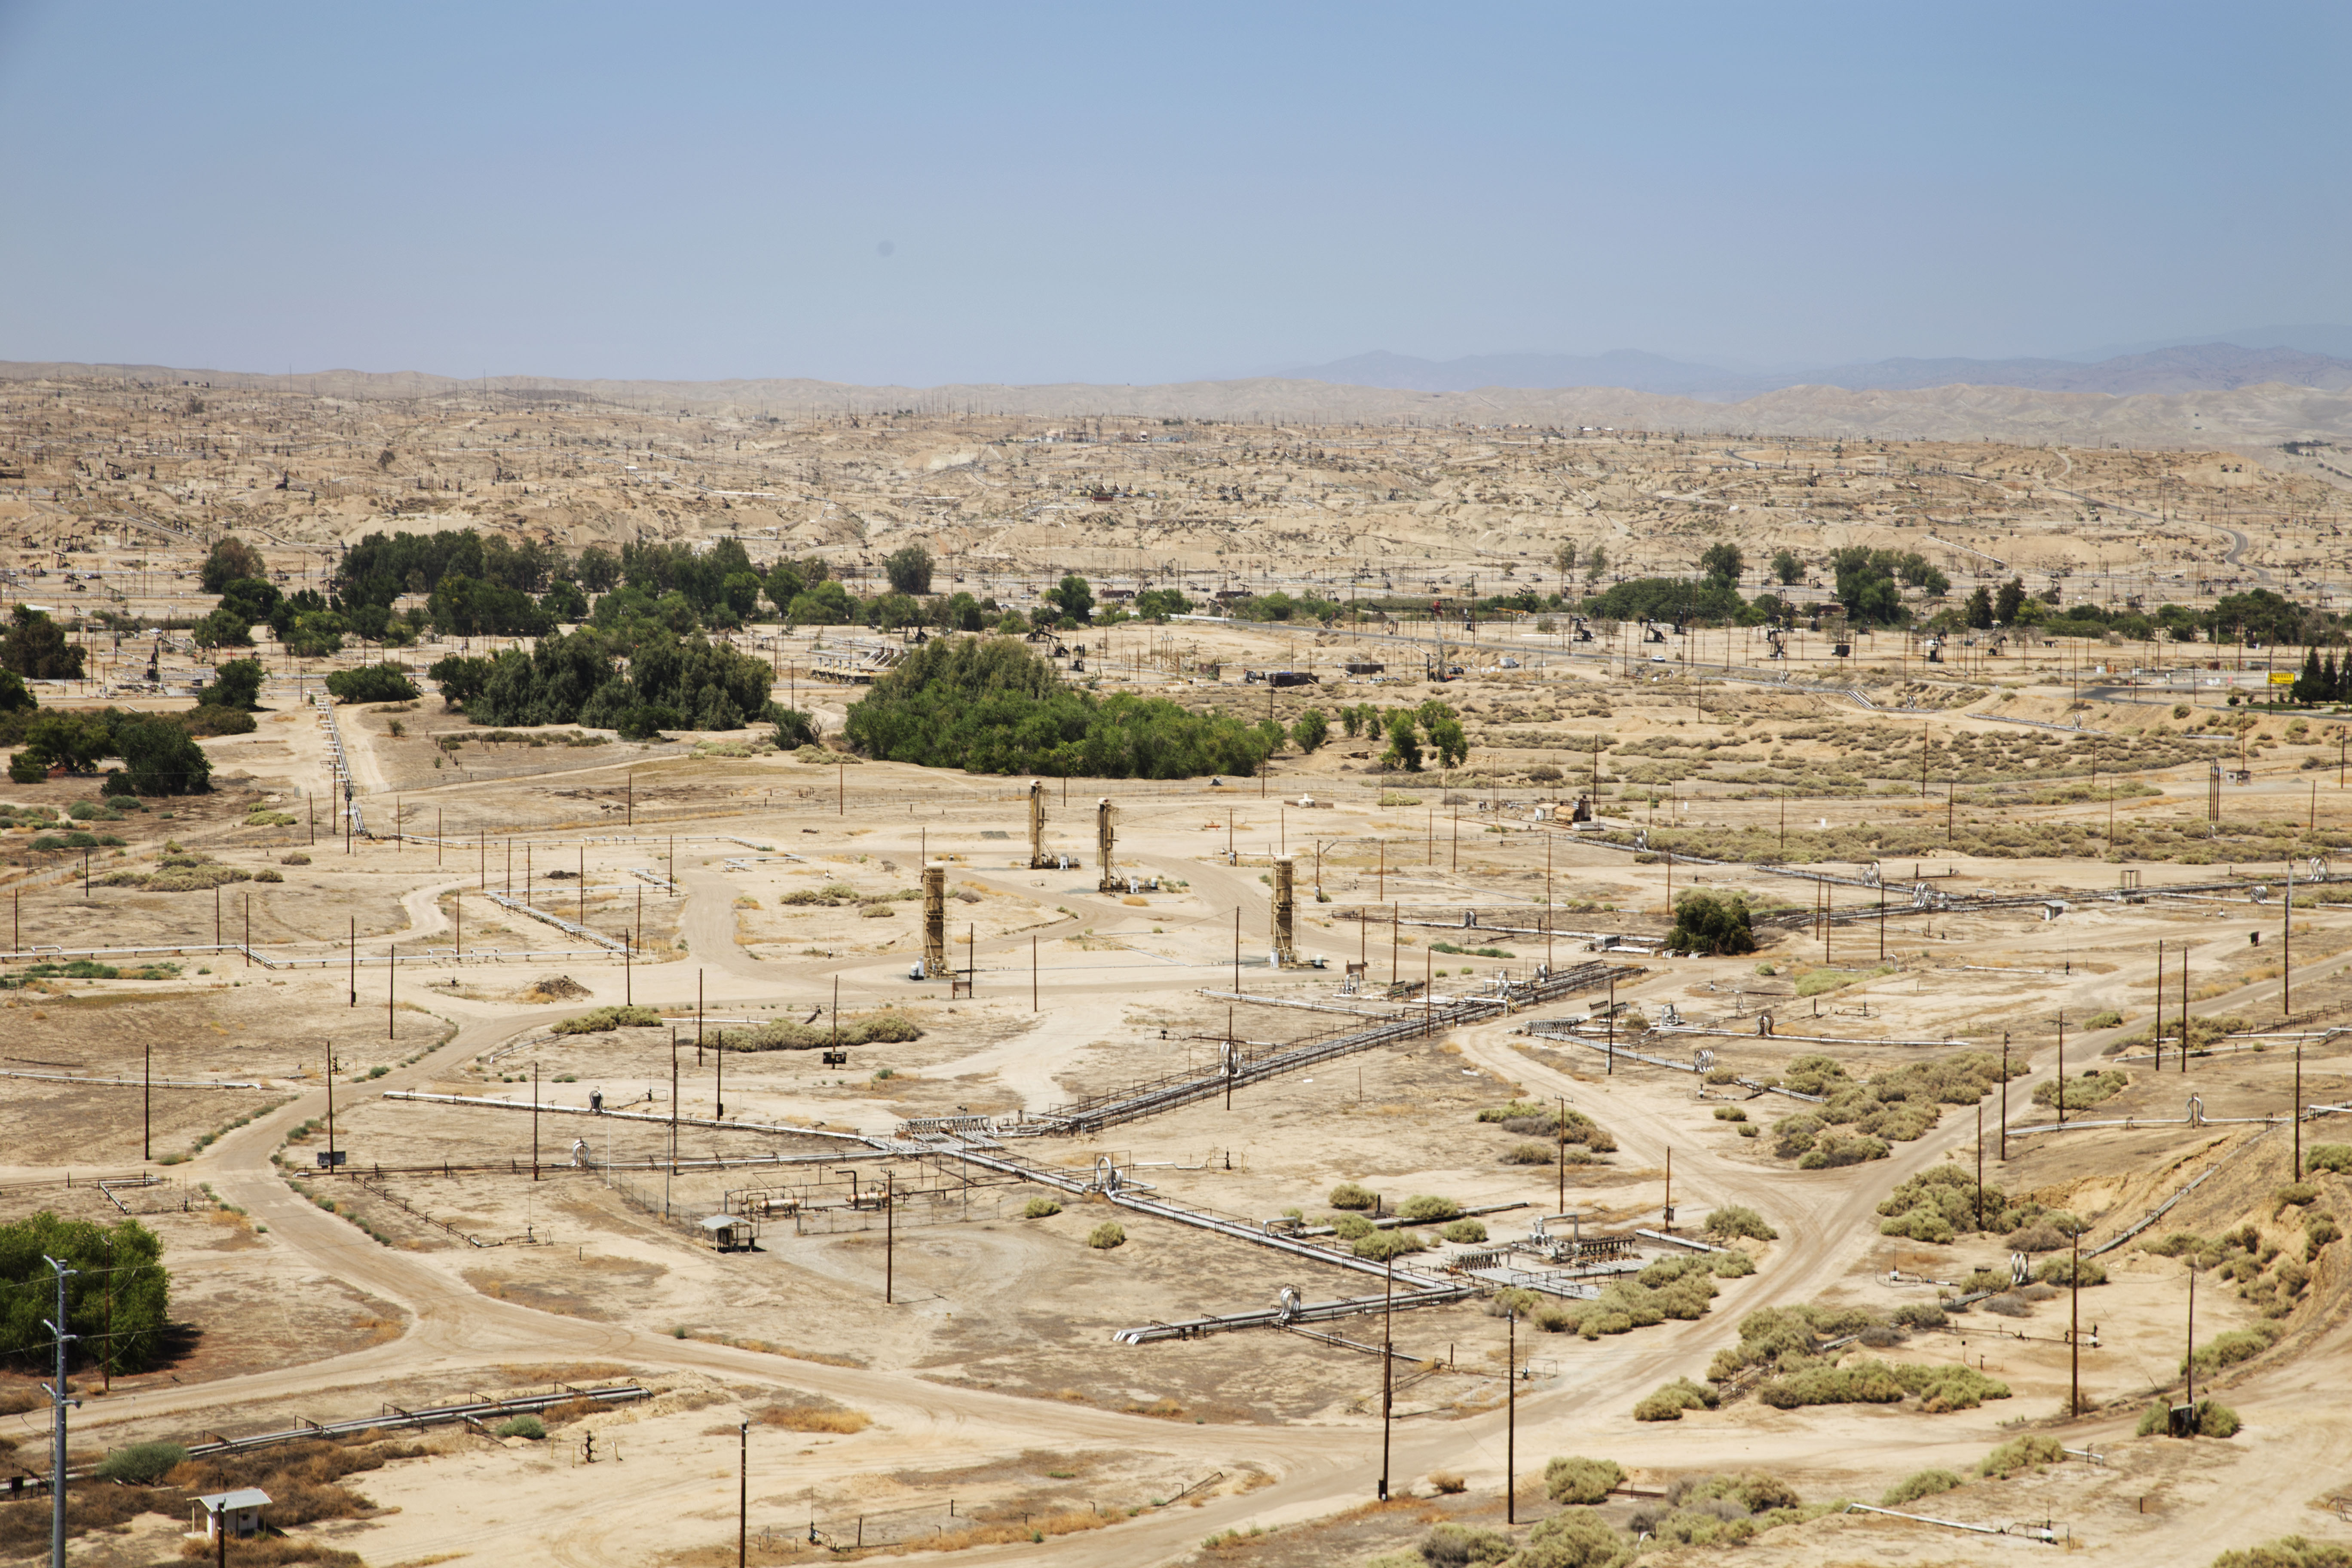 Kern River Oil Field in California. Photo credit: Andrew Grinberg / Clean Water Action